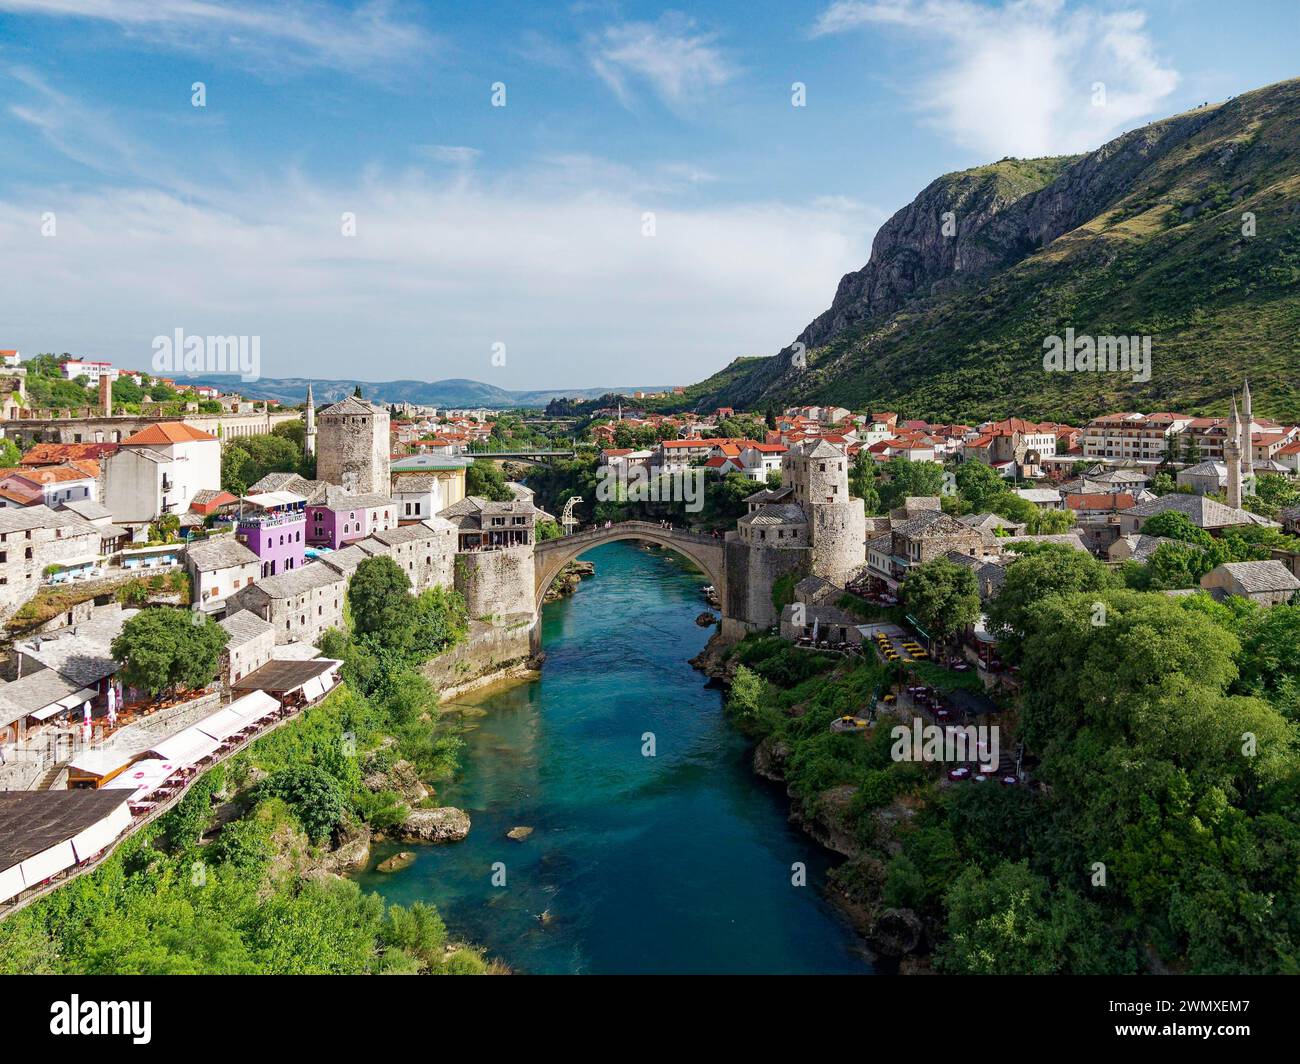 View over the old town centre of Mostar, Montenegro Stock Photo